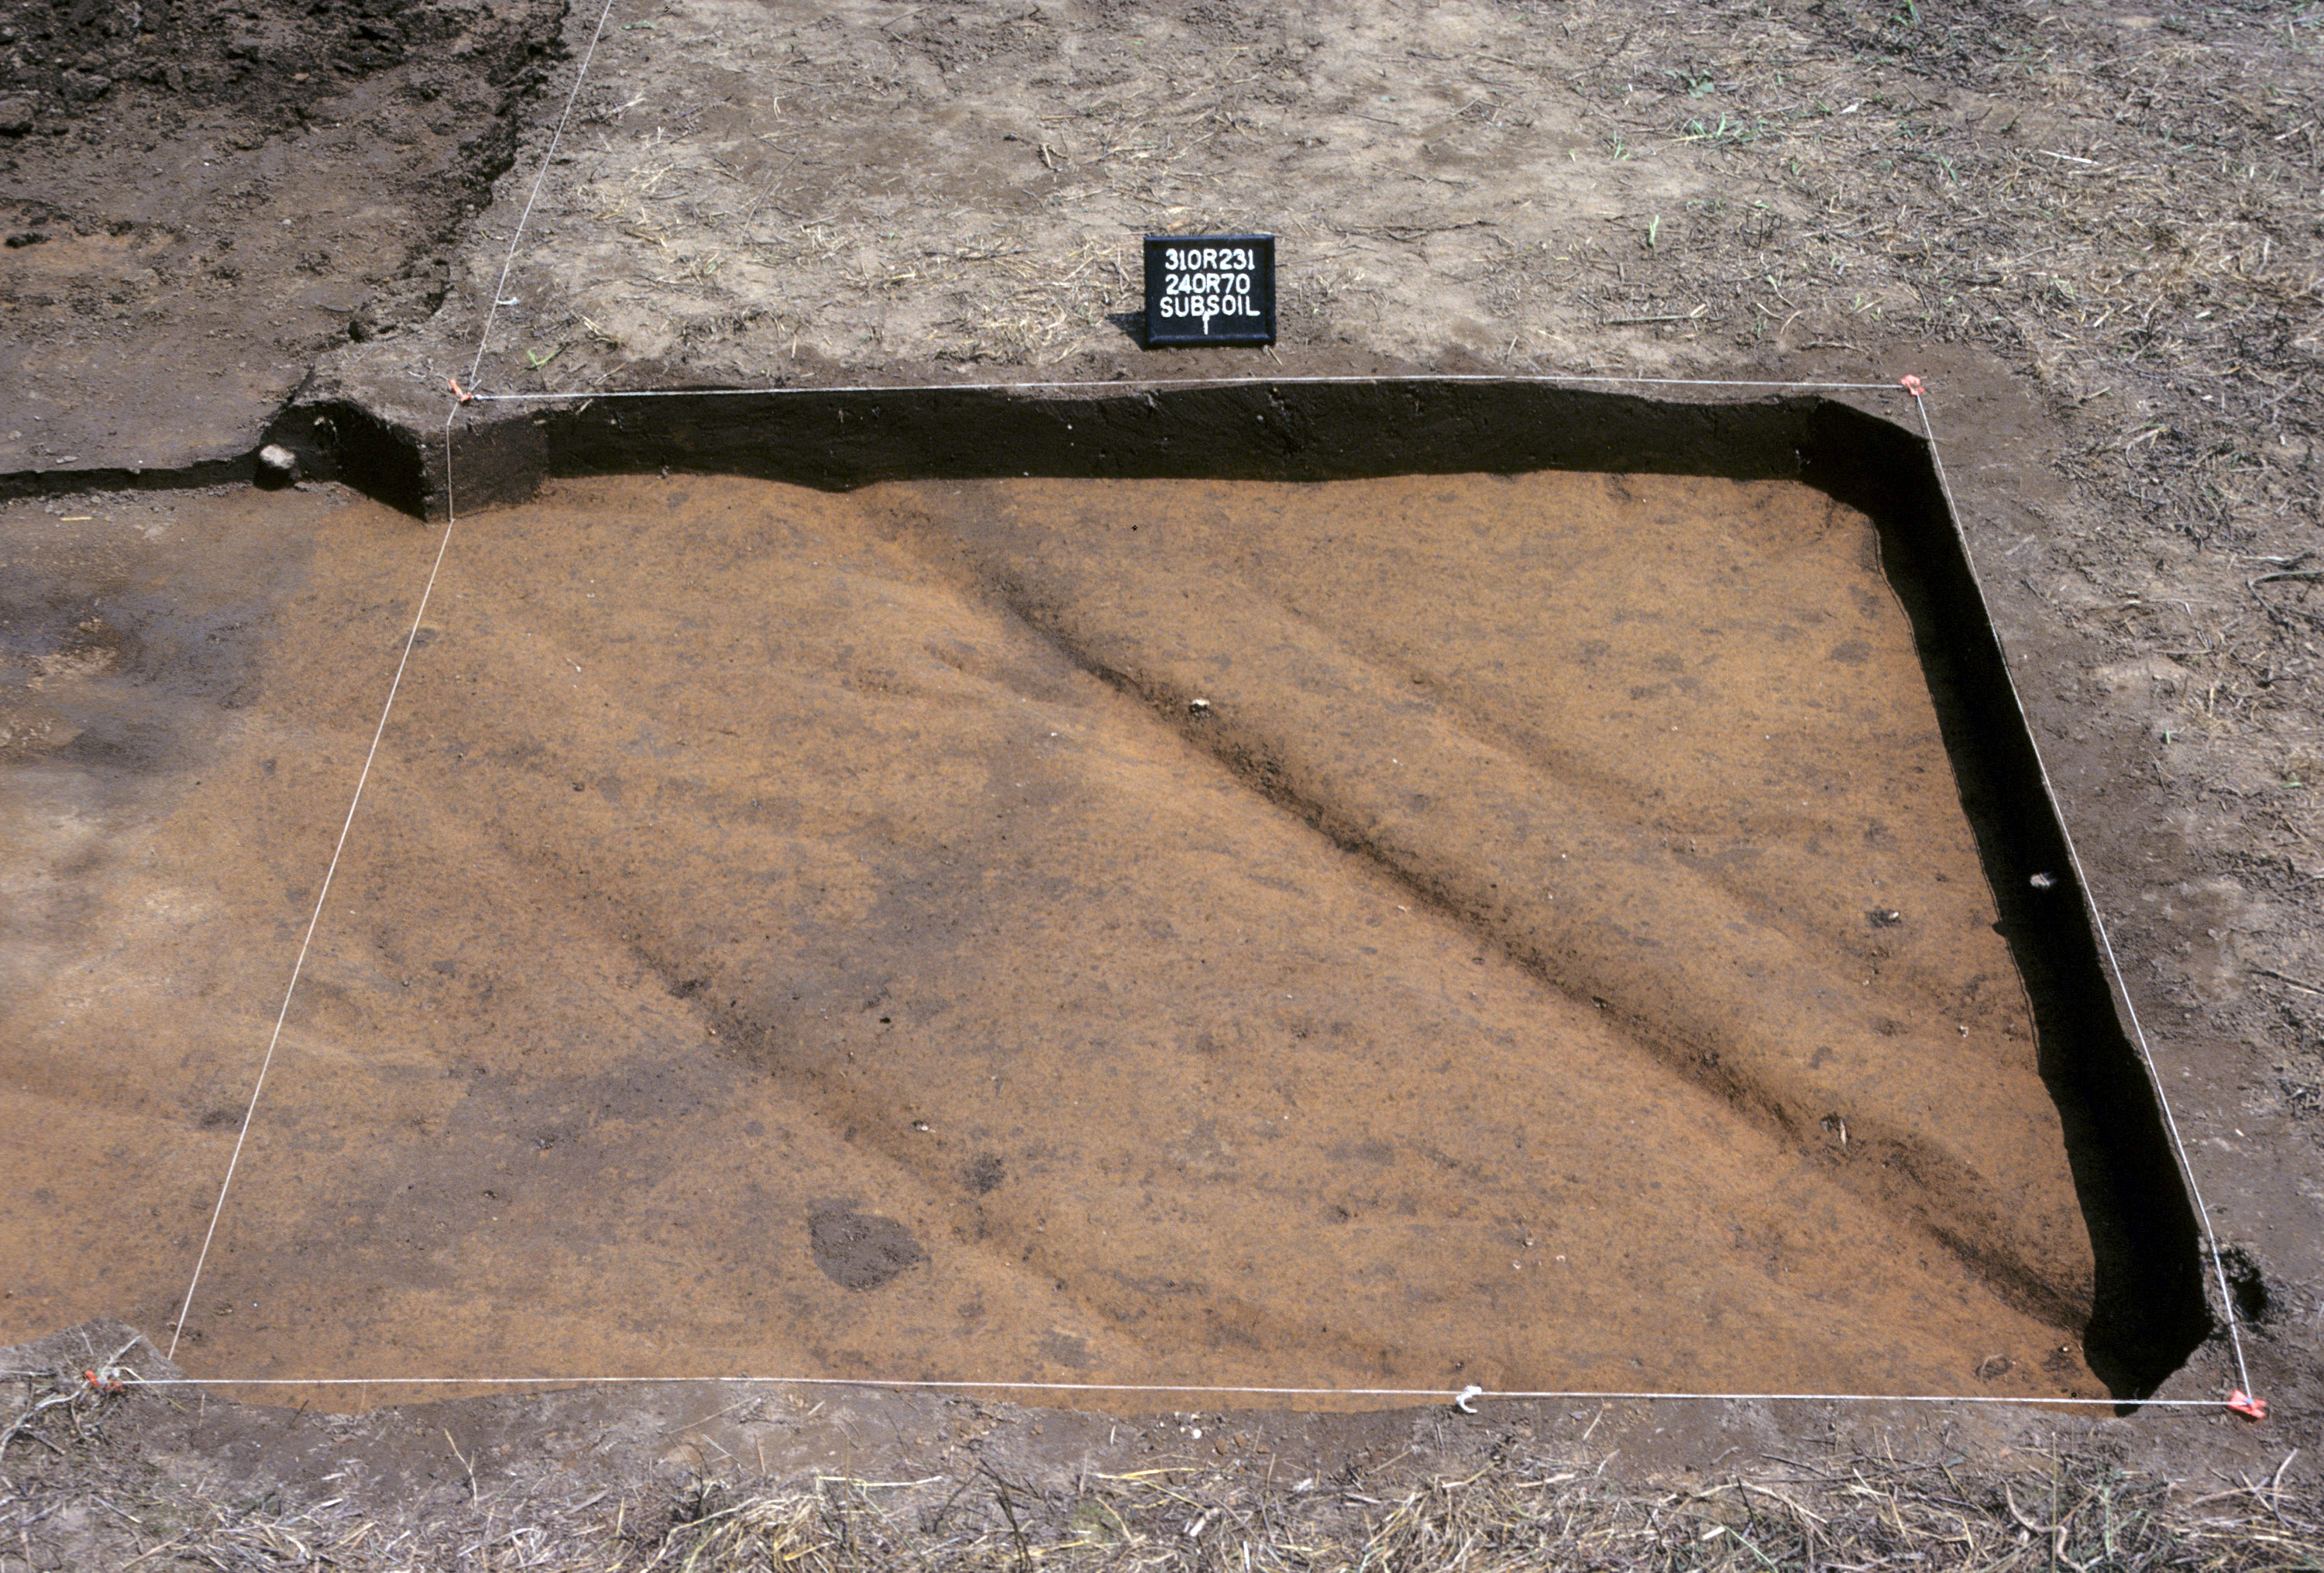 Figure 861. Sq. 240R70 at top of subsoil (view to north).